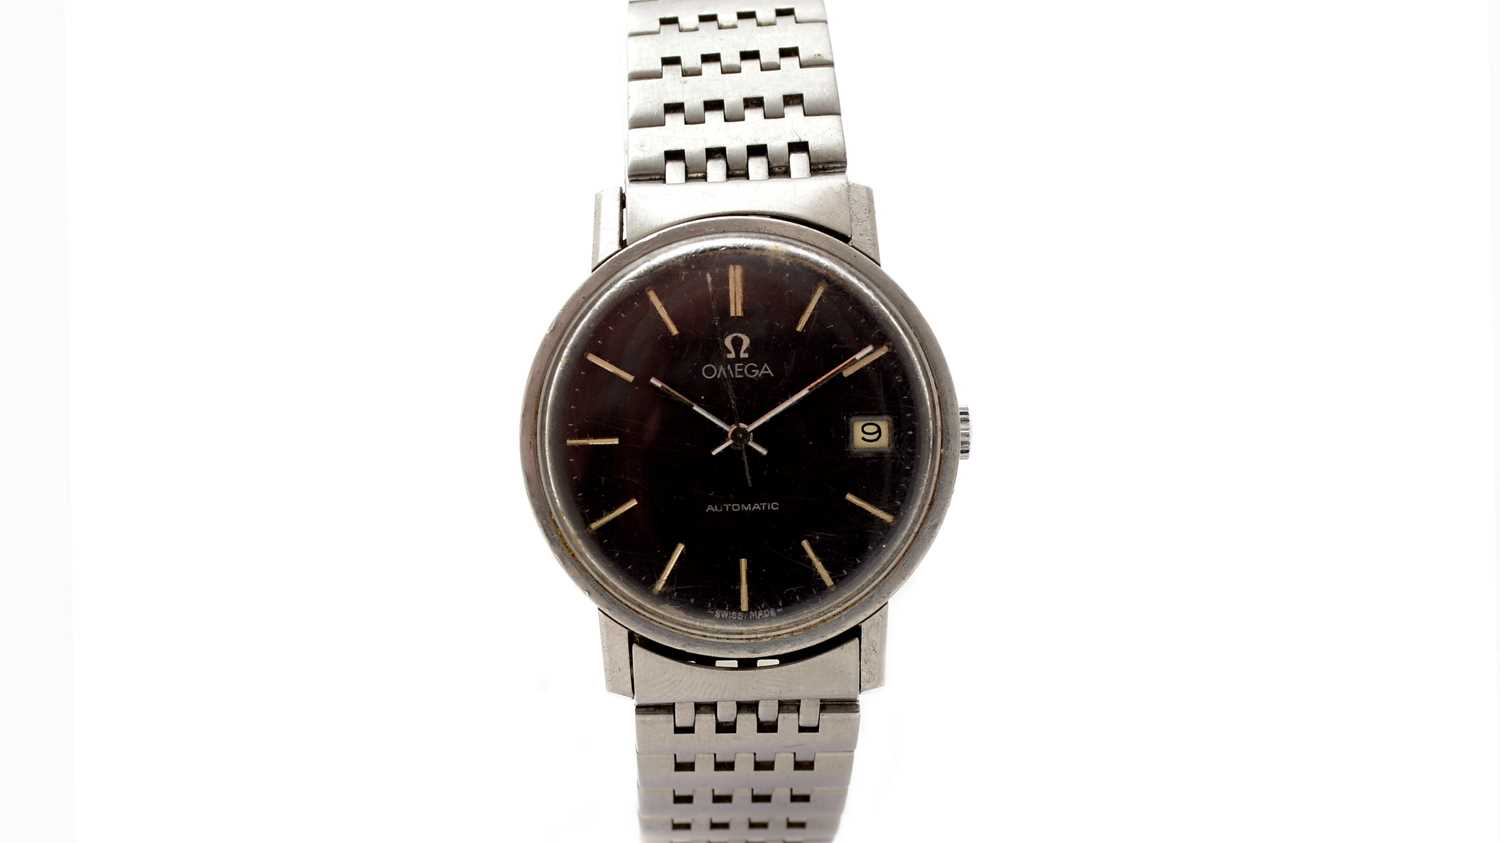 Lot 620 - Omega: a steel-cased automatic wristwatch